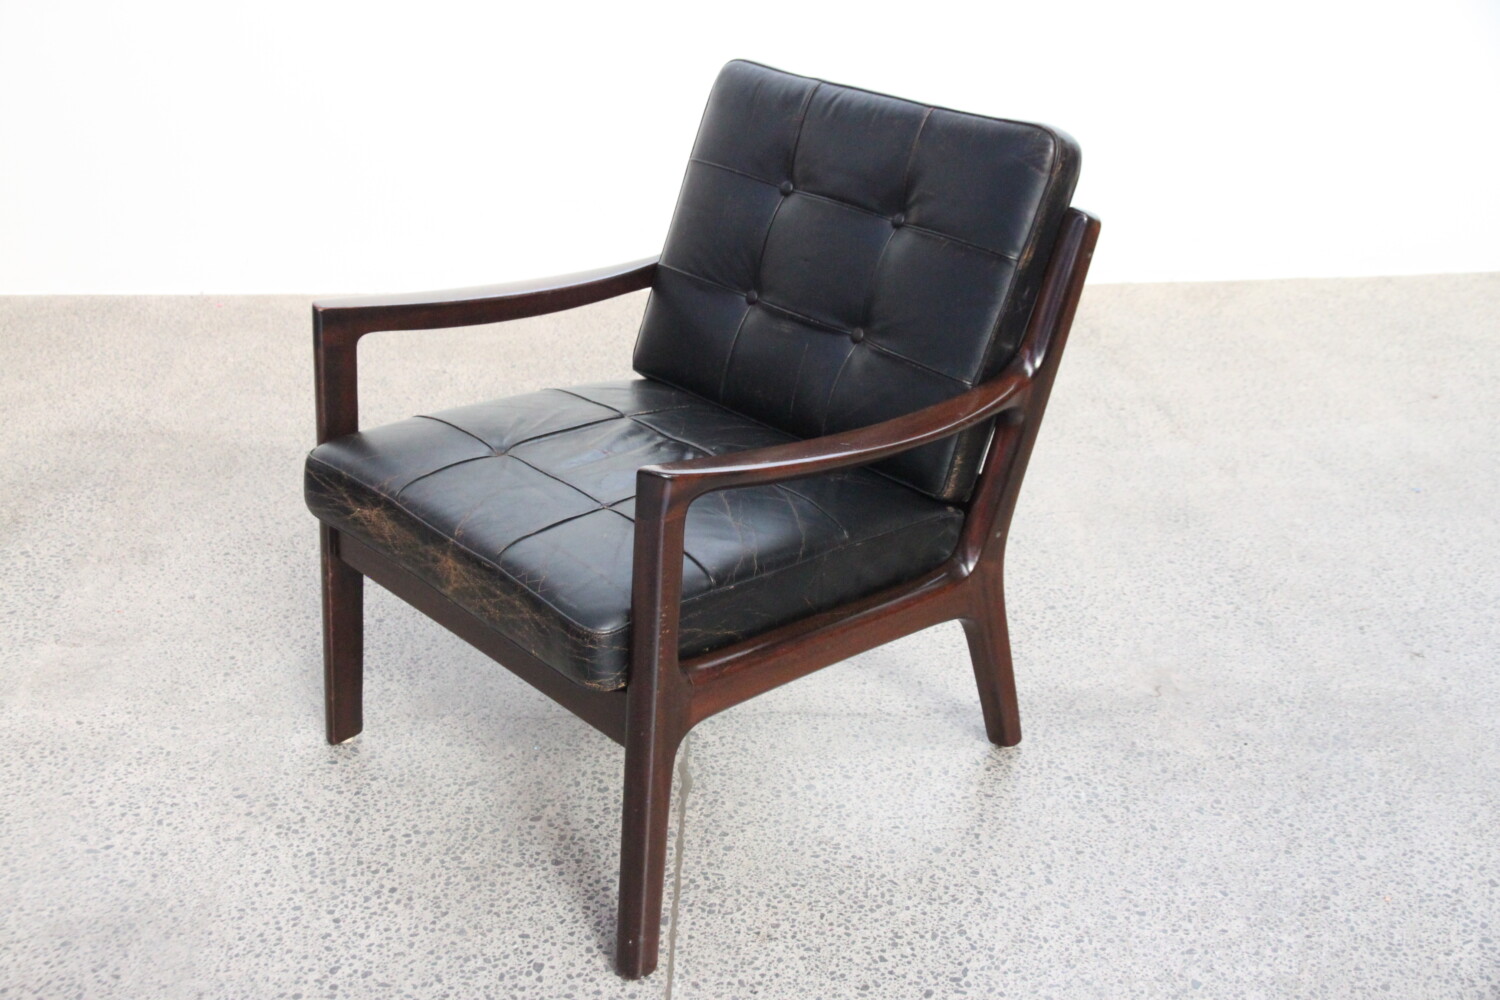 Armchair by Ole Wanscher sold